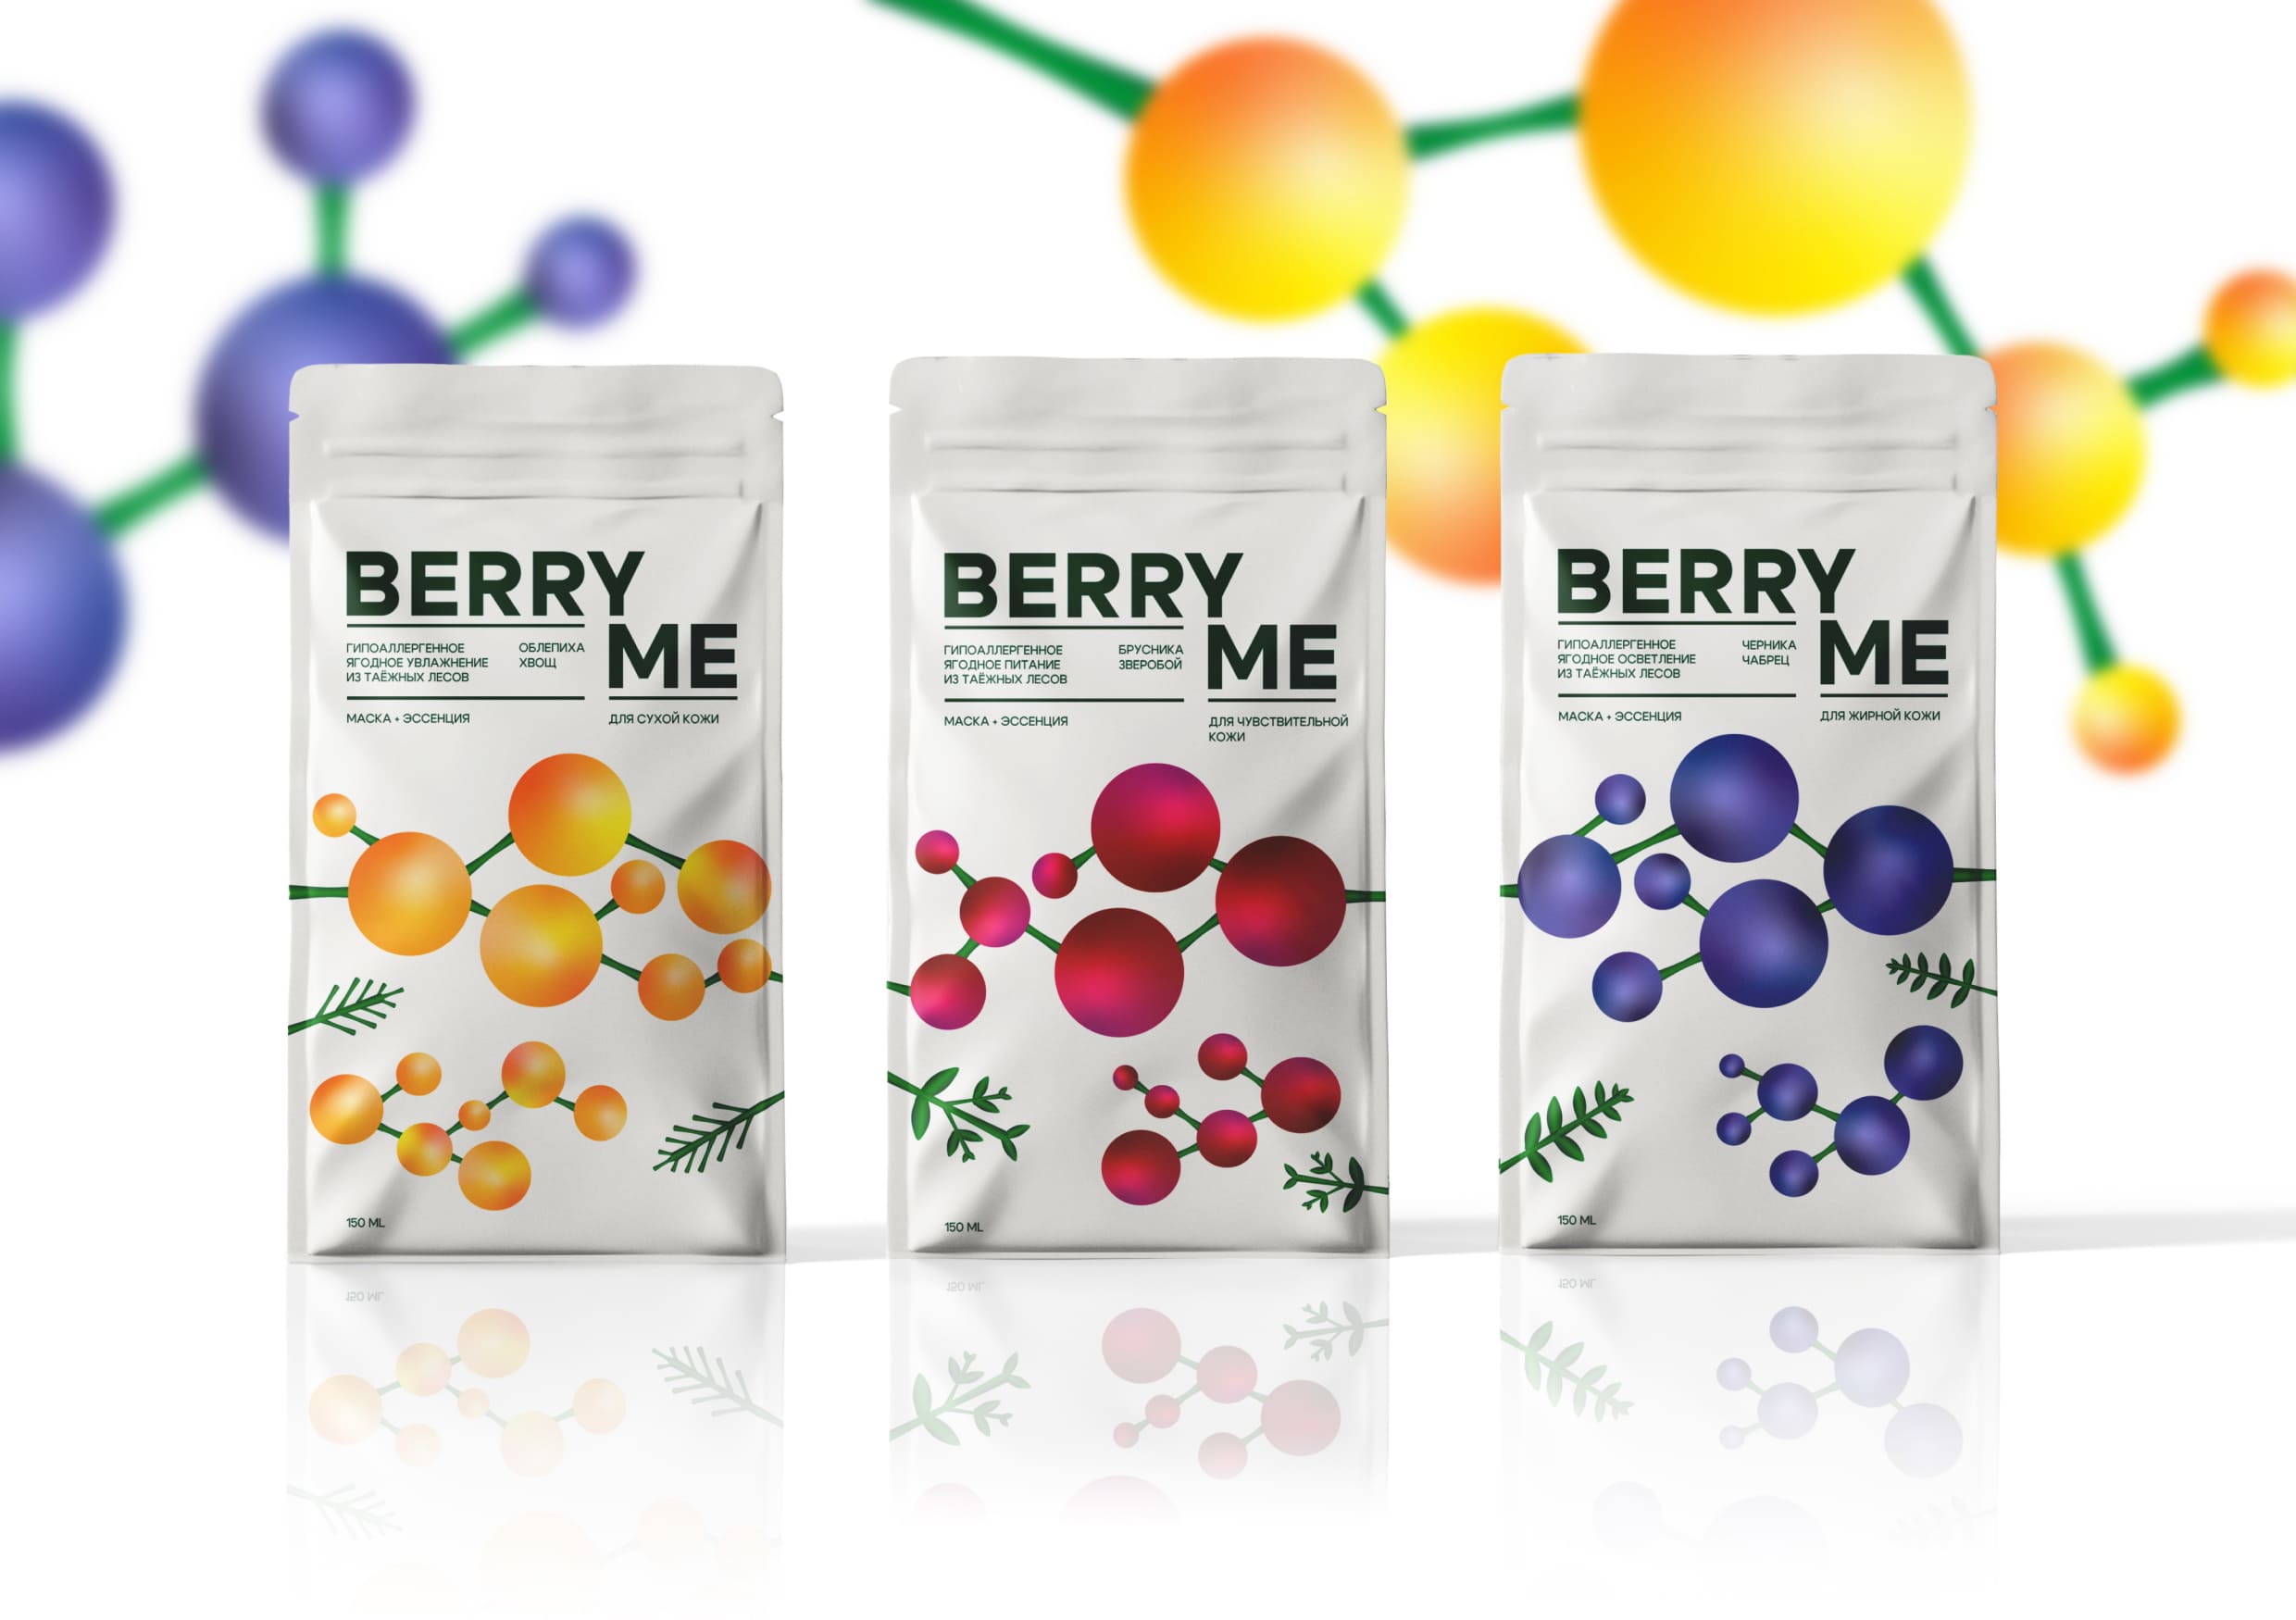 Student Concept Brand of Hypoallergenic Berry Face Masks Called BerryMe Designed by Katya Sharf